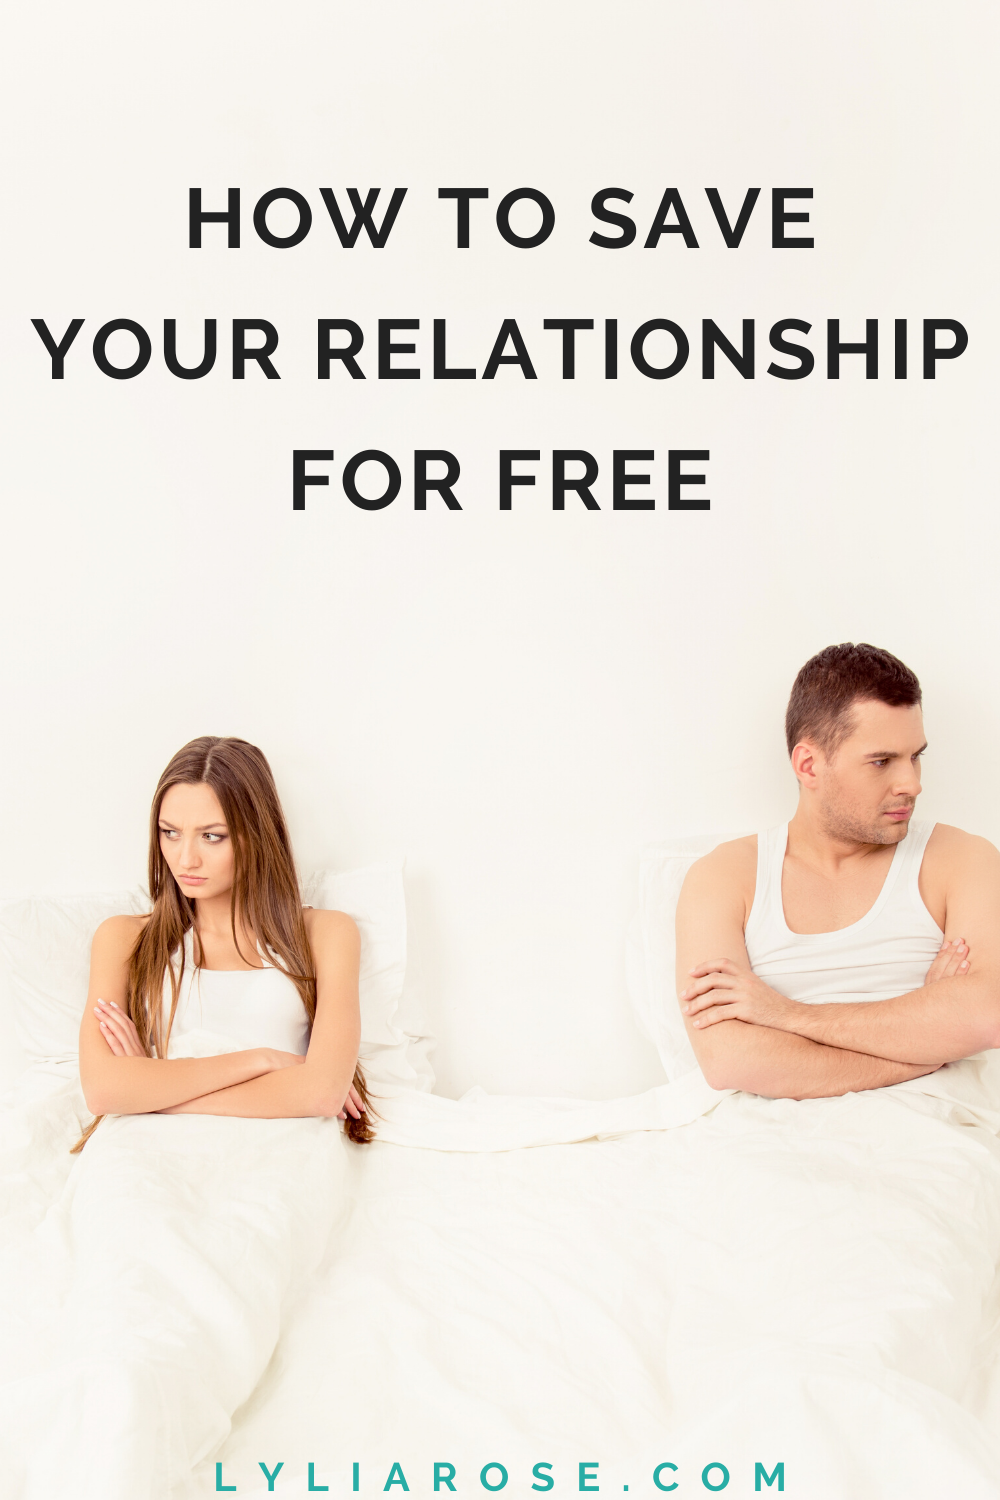 How to save your relationship for free